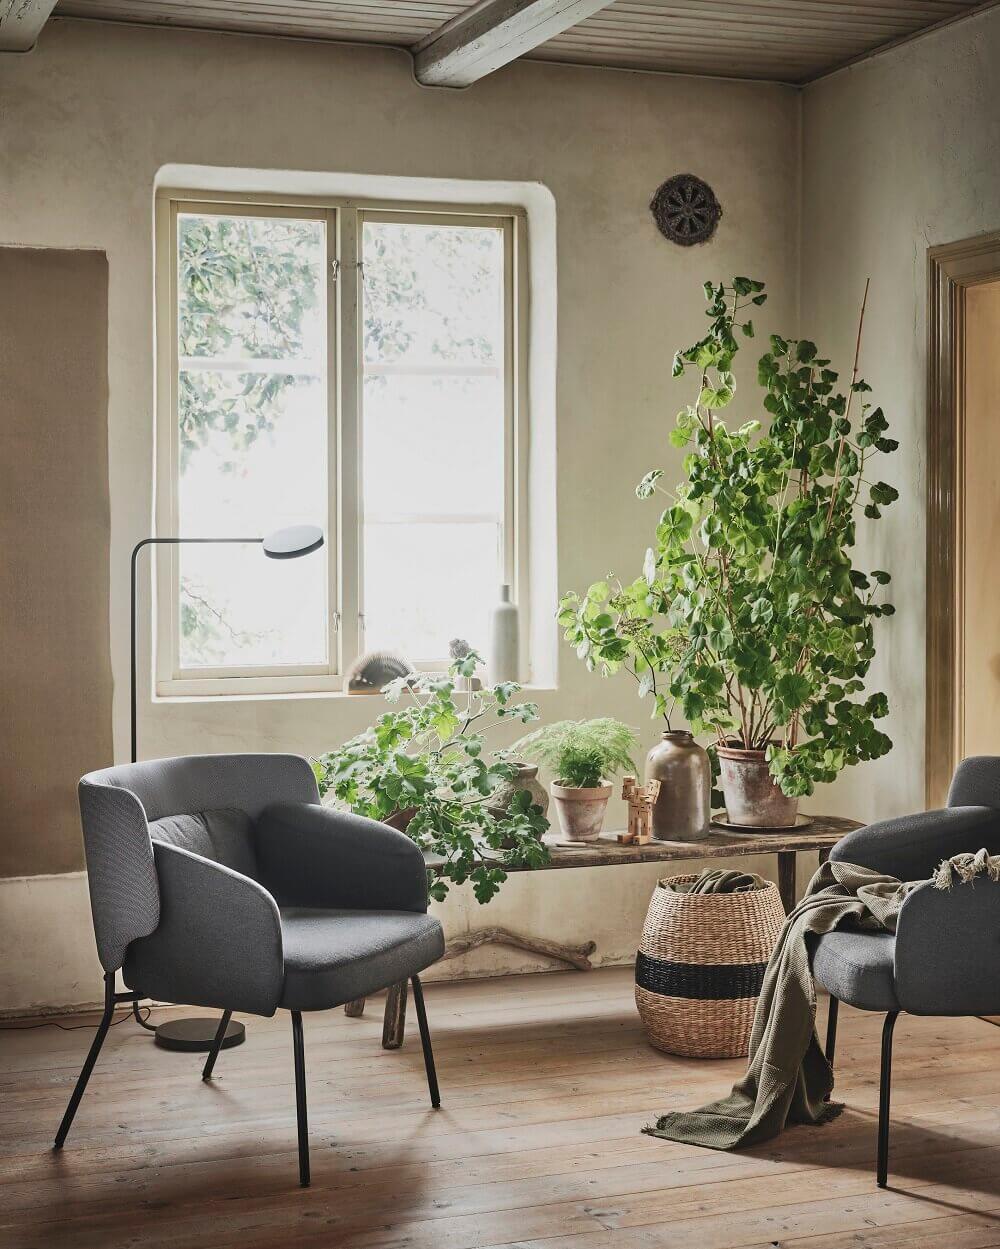 ikea spring collection 2020 mindful living nordroom6 IKEA Spring Collection 2020: Mindful Living and Close to Nature